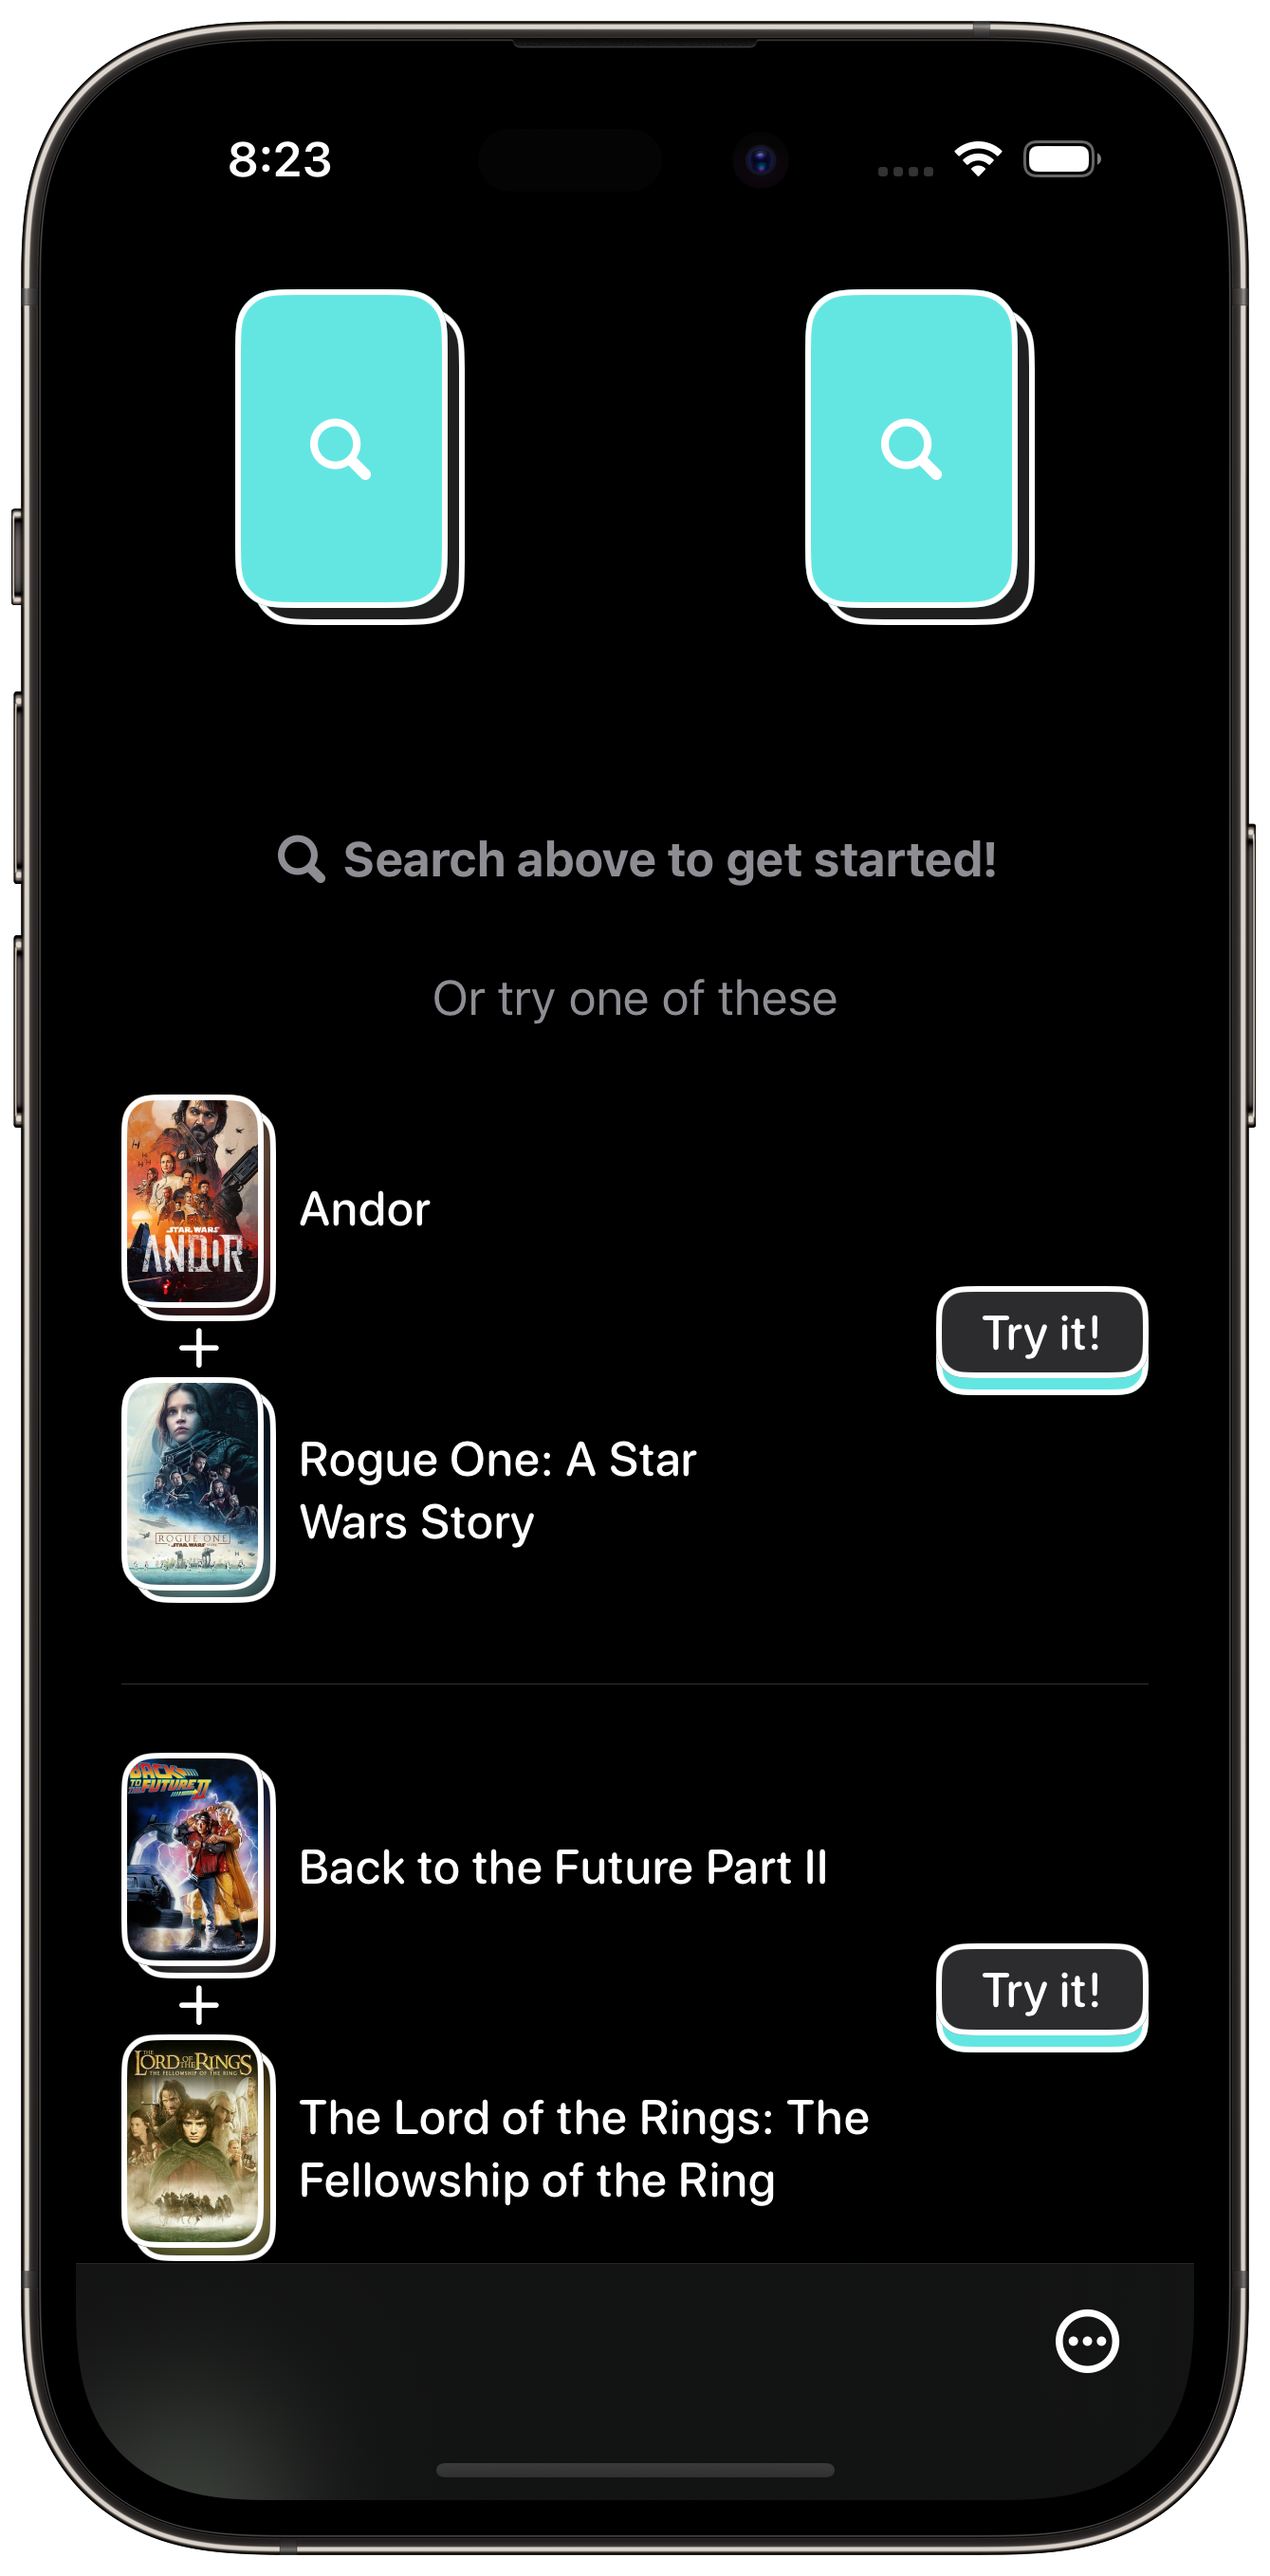 A screenshot of ScreenCred showing the app in dark mode, with a black background and white borders